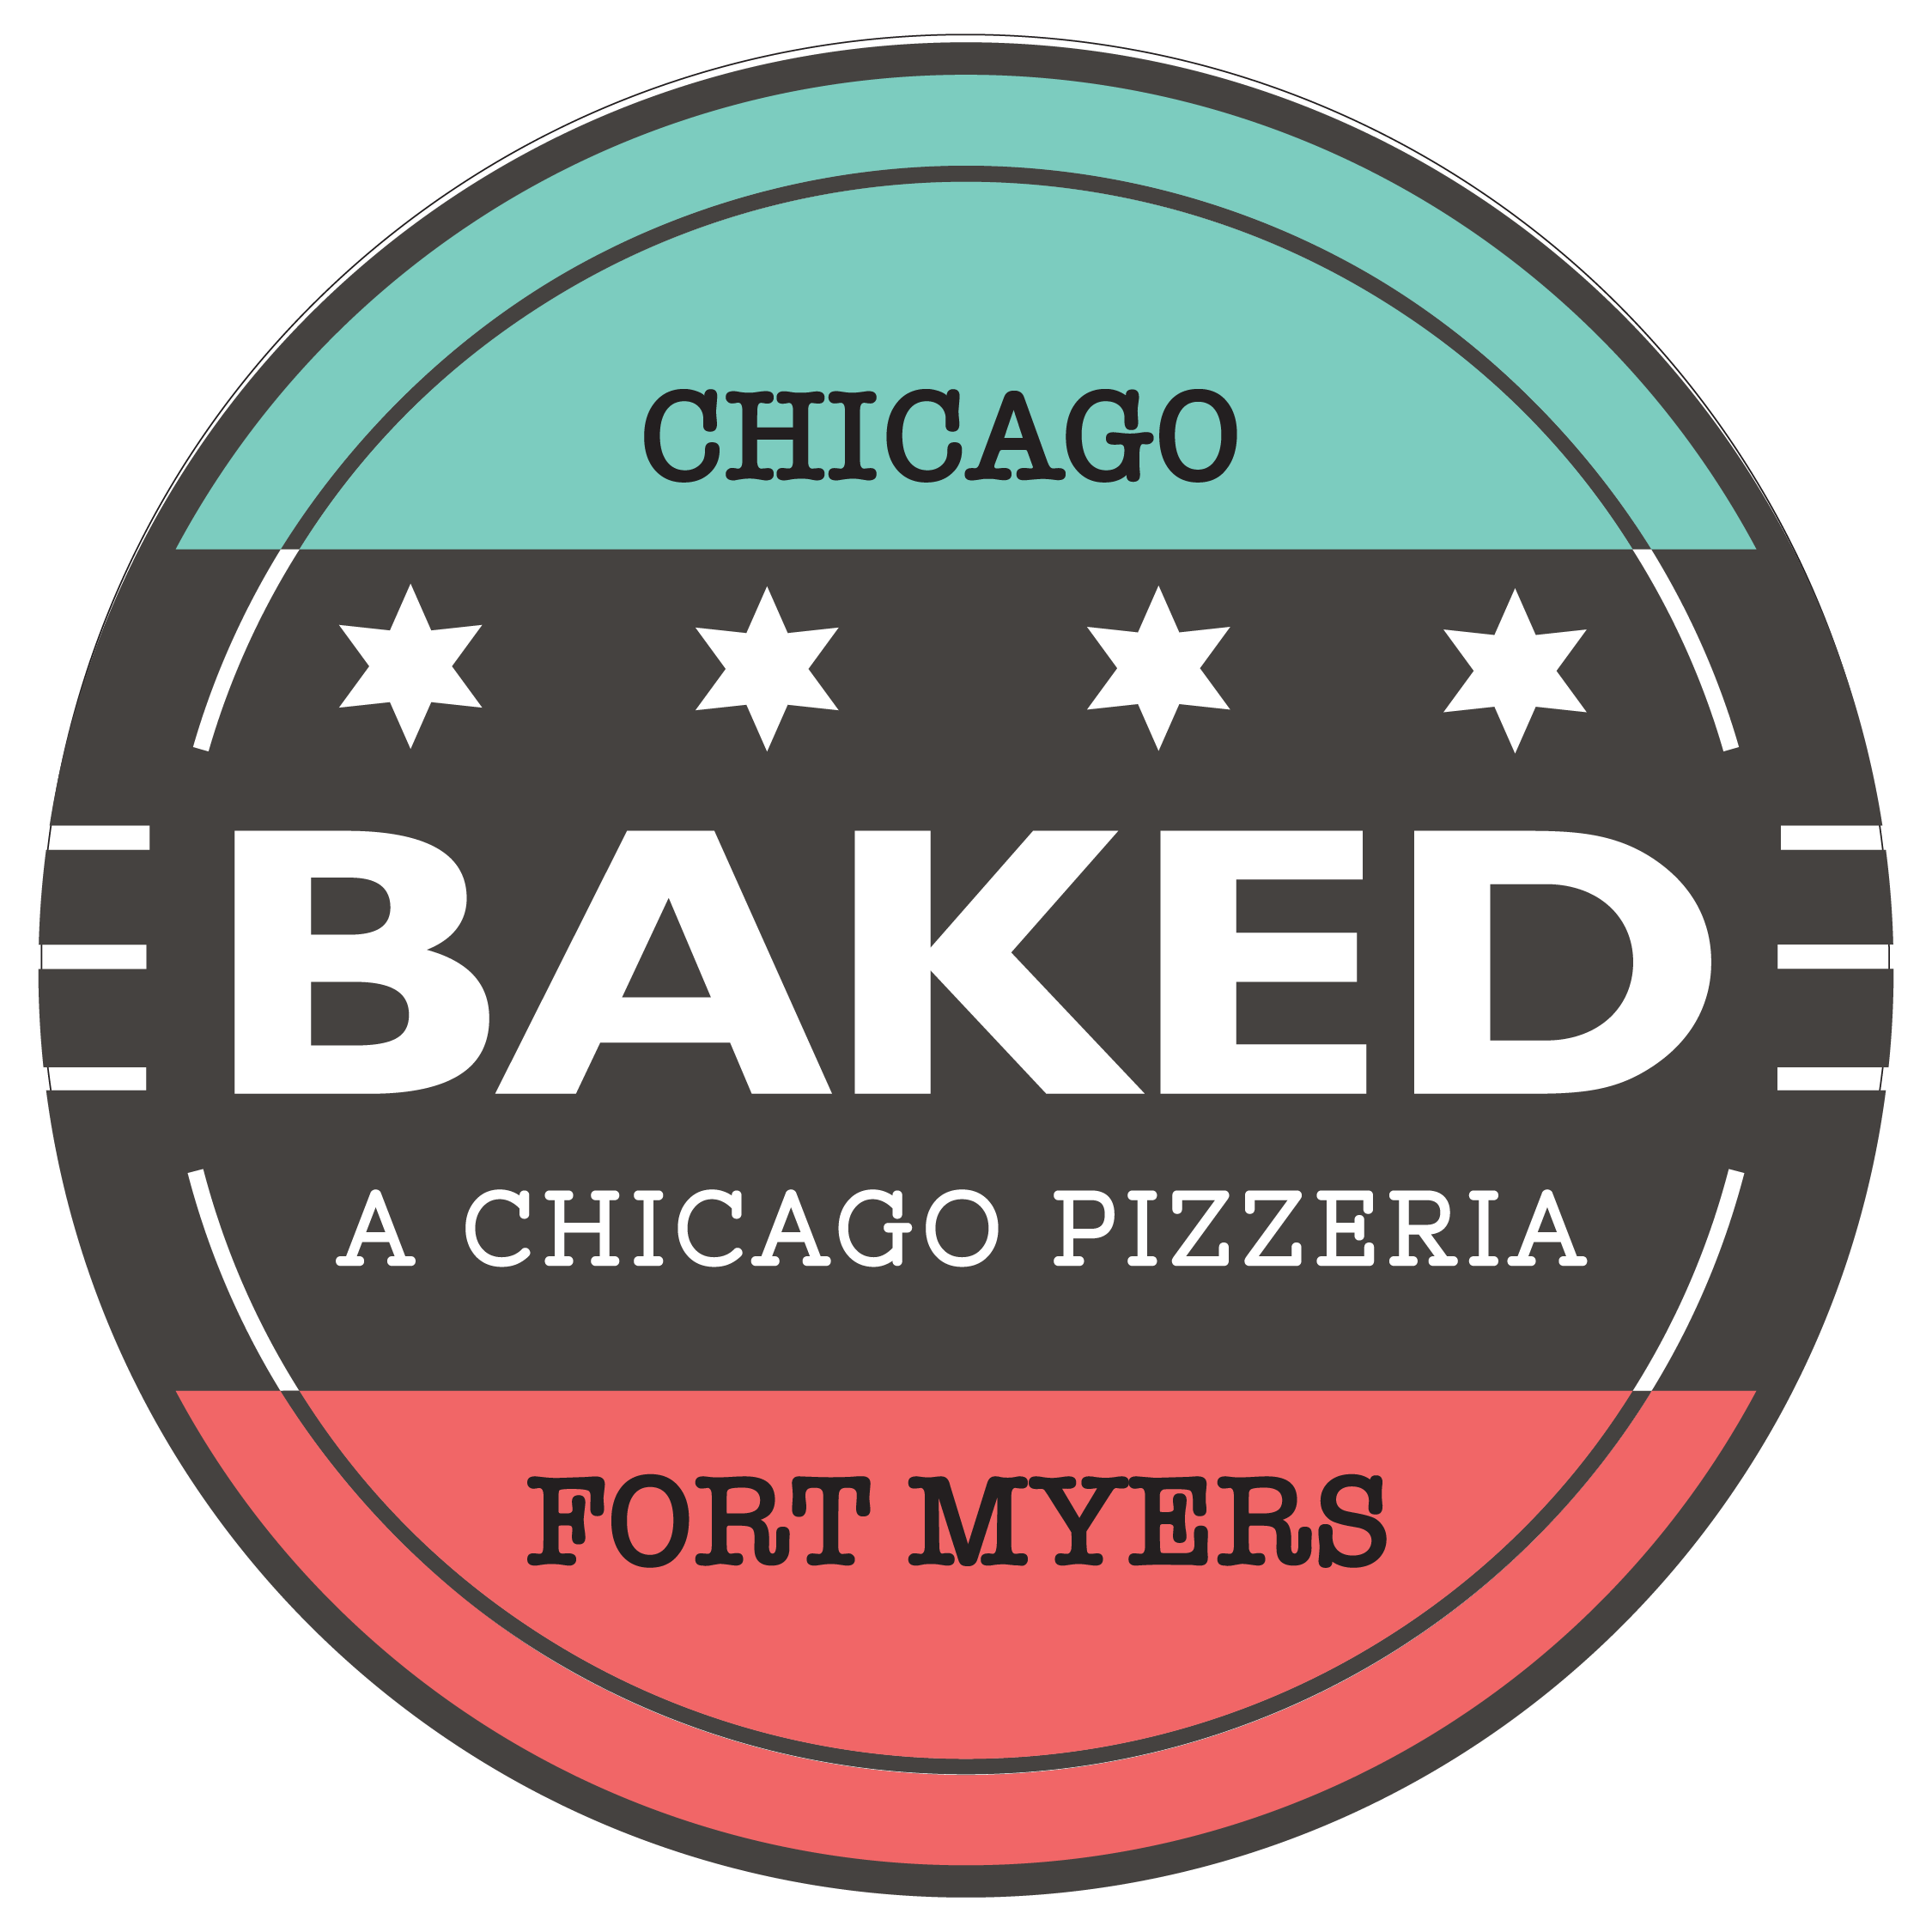 Chicago Baked Pizzeria Home